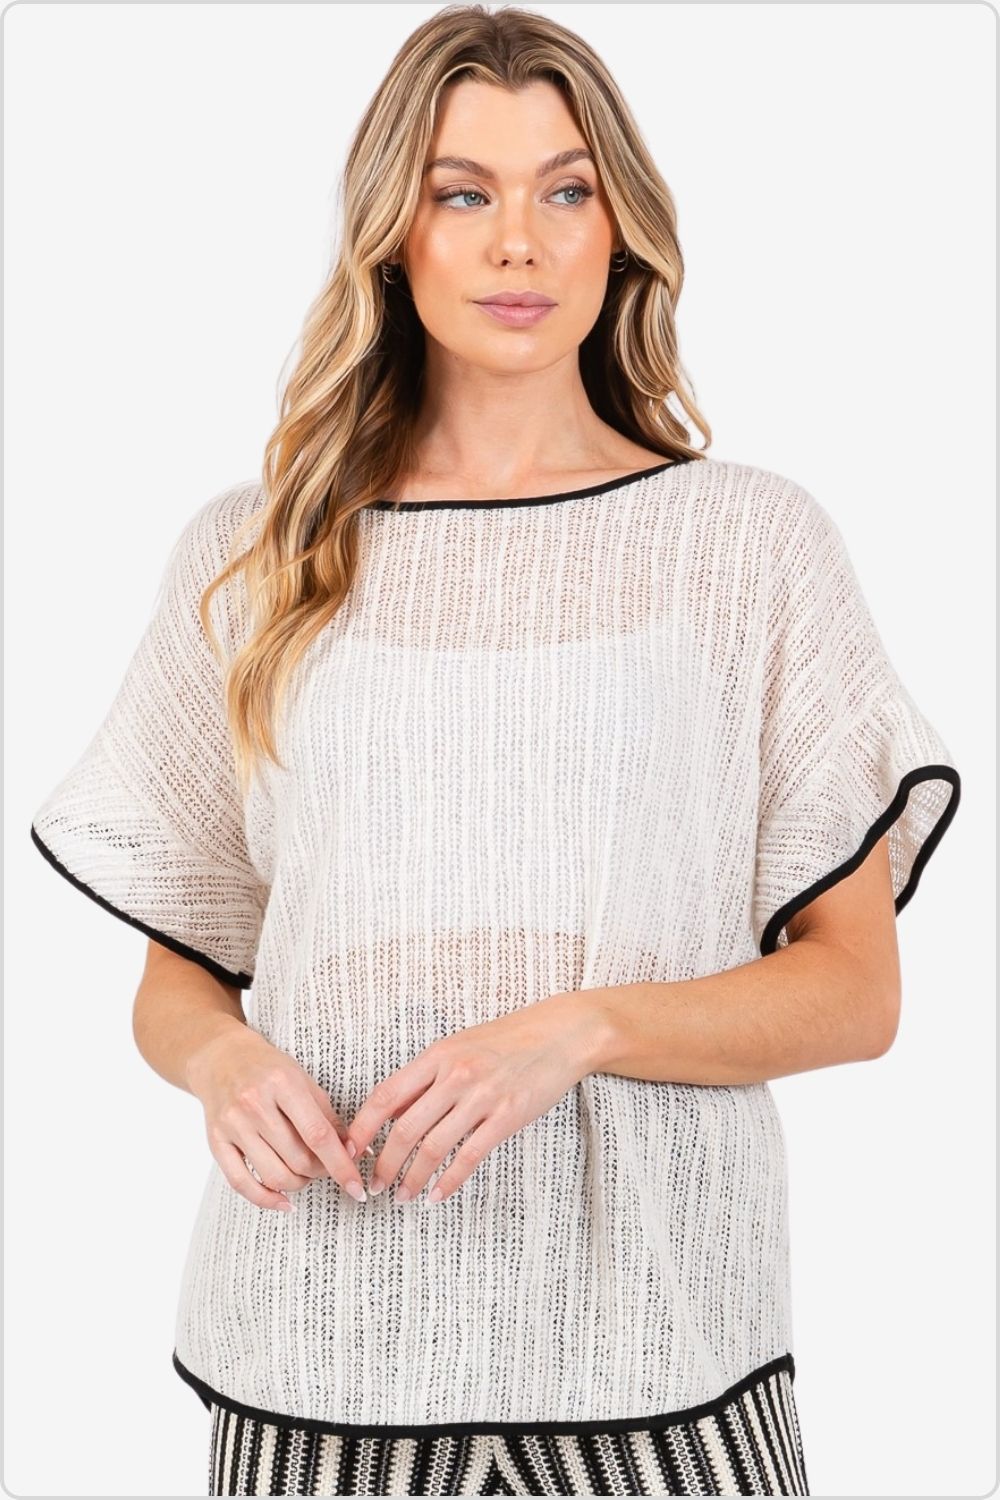 Stylish knit cover-up with black contrast trim and short sleeves.